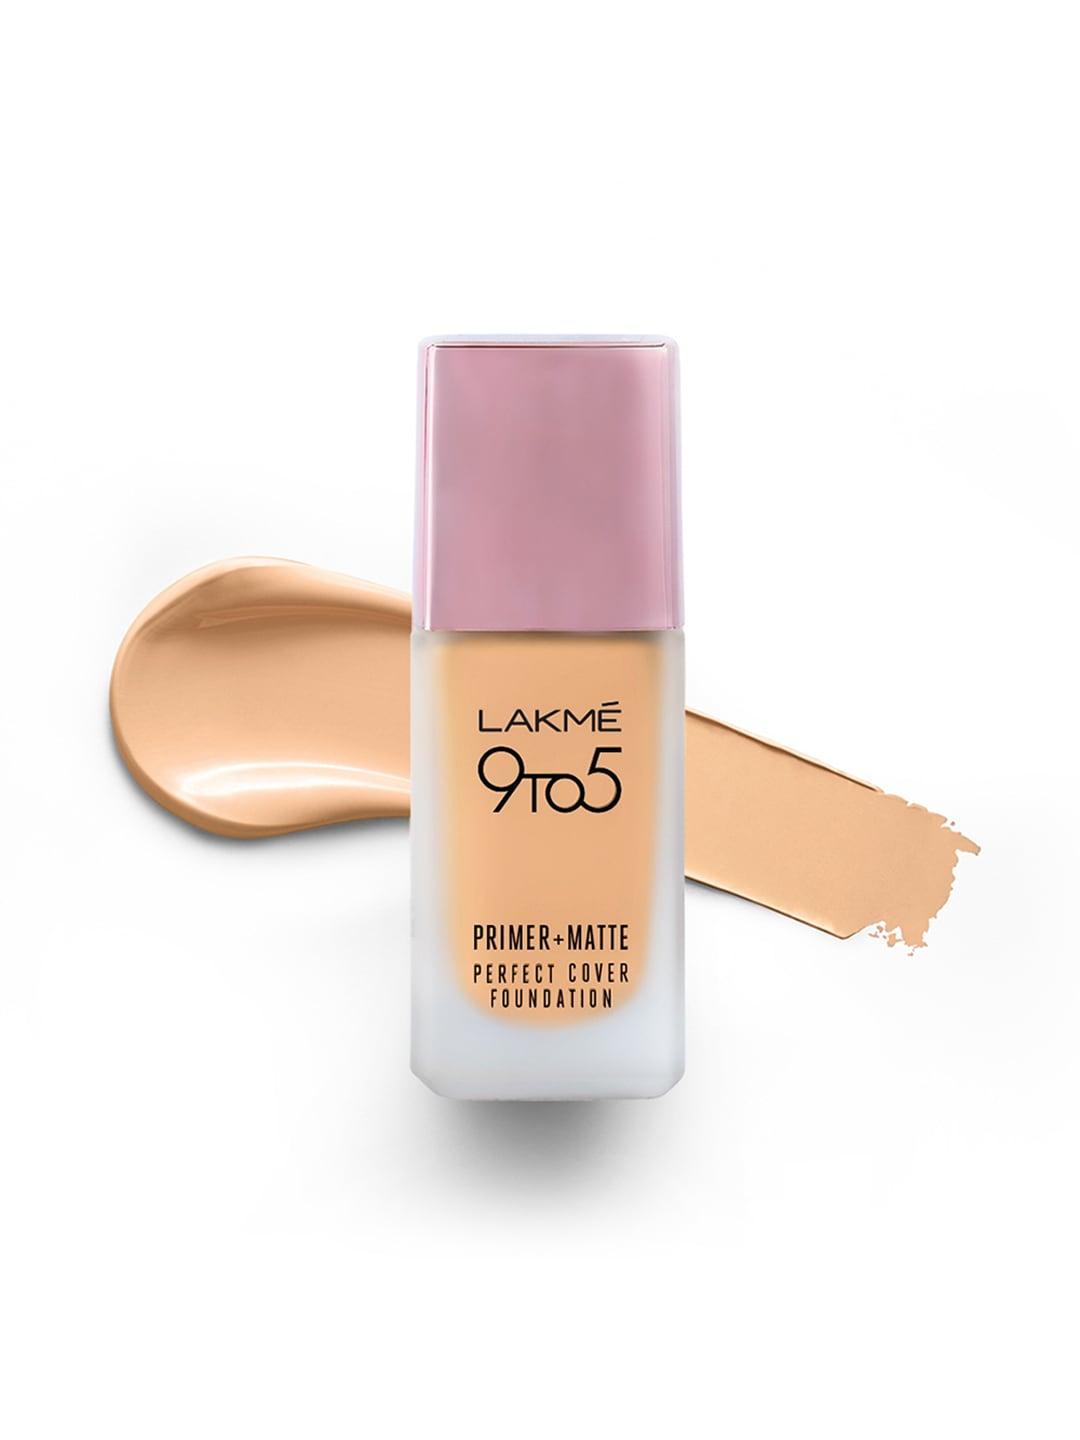 Lakme 9To5 Primer + Matte Perfect Cover SPF20 Foundation 25 ml - Warm Light W110